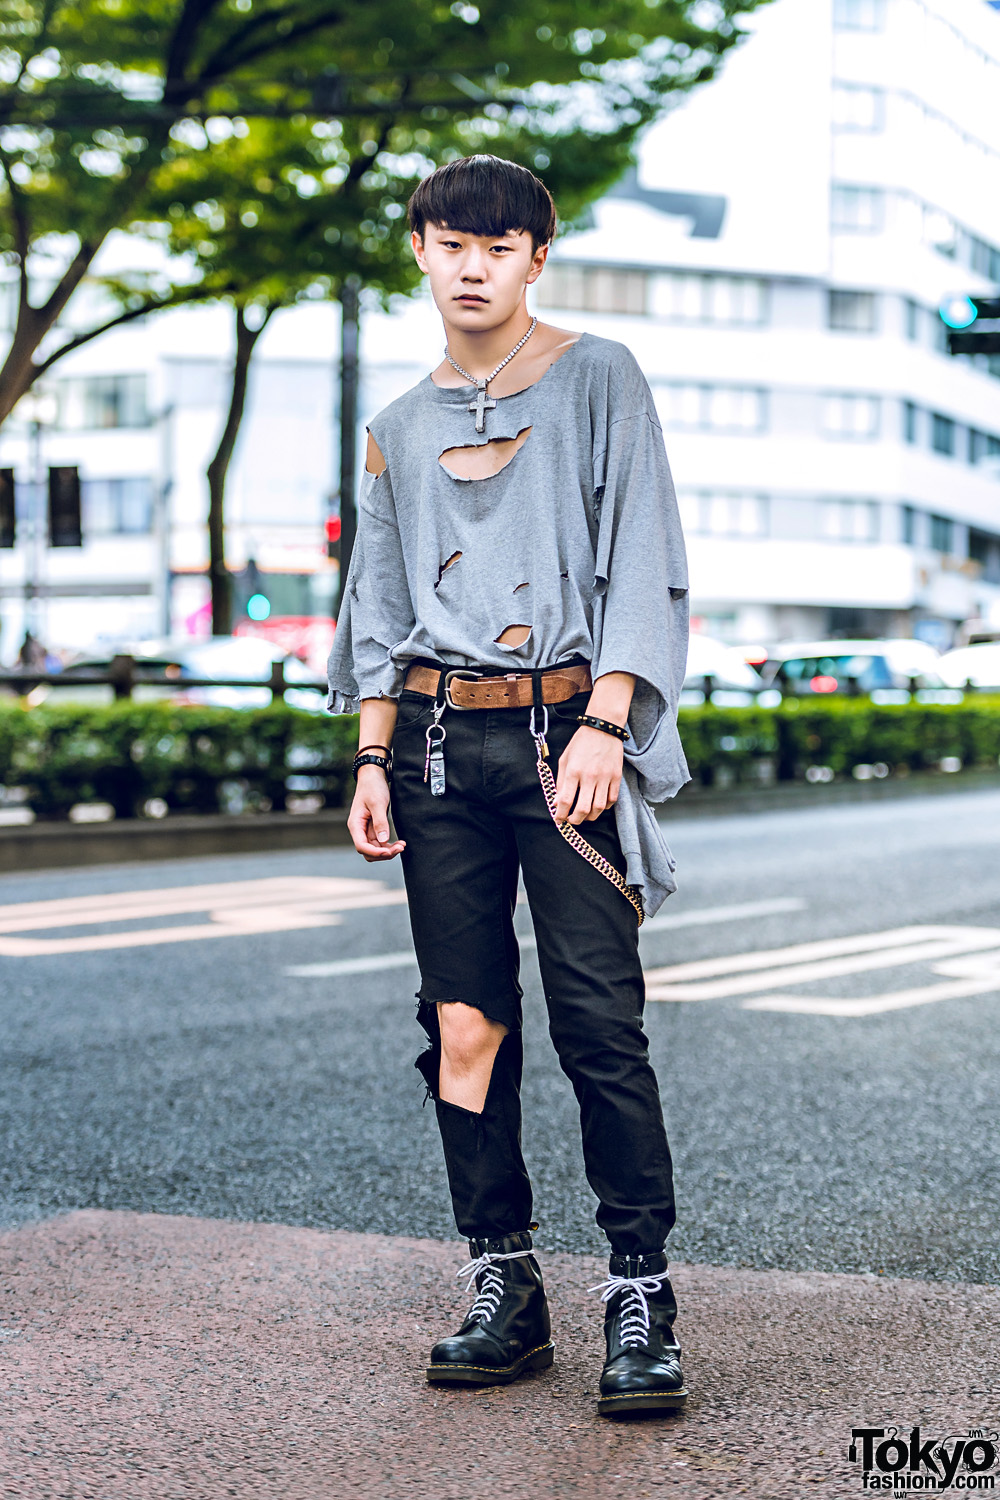 Distressed Japanese Street Style w/ Ripped Sweatshirt, Cut Out Pants, Dr. Martens Boots & Rhinestone Cross Necklace